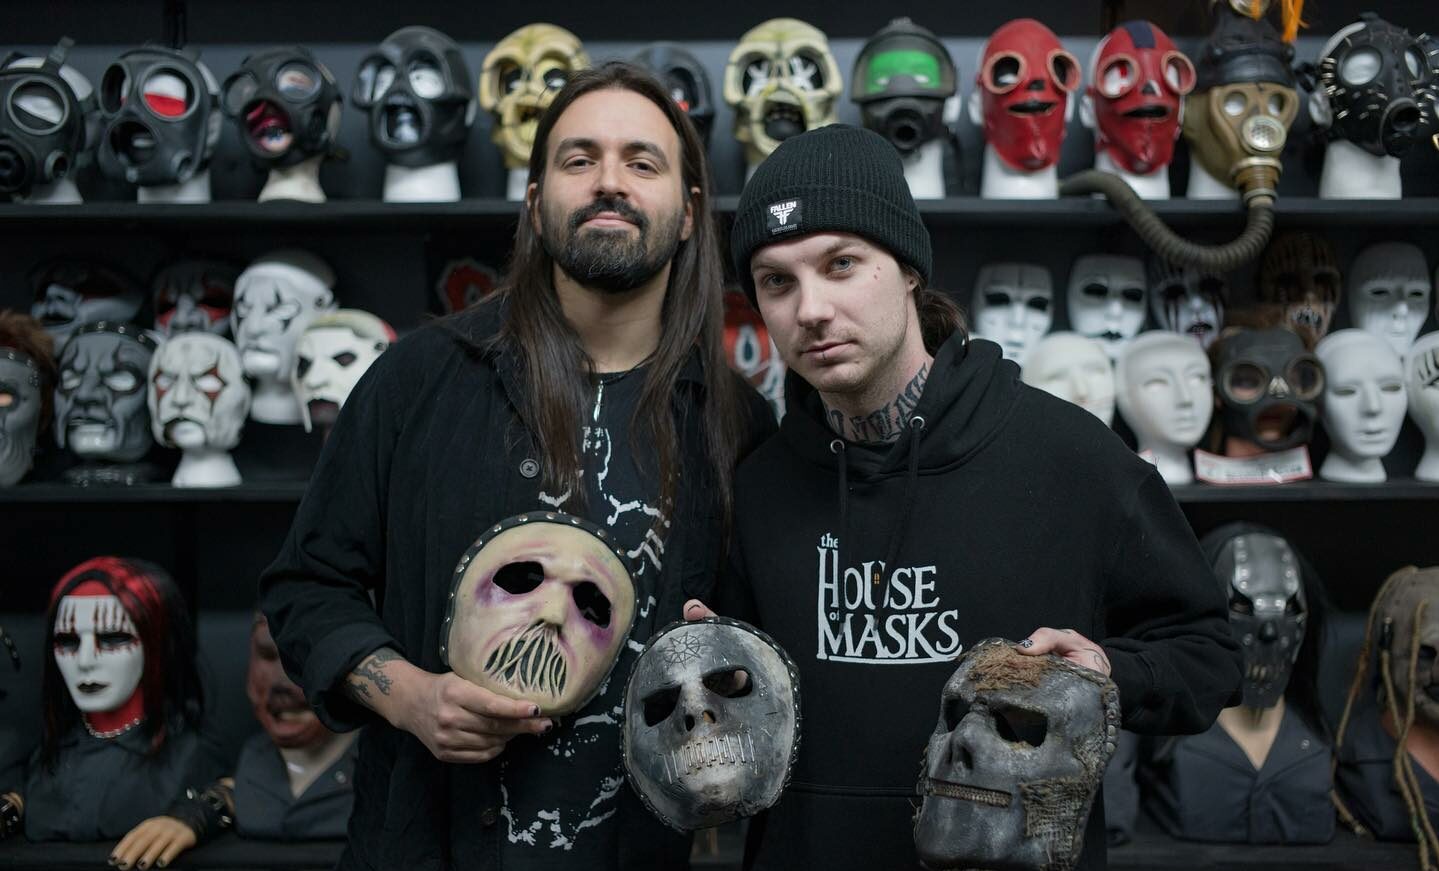 terrasse Zoom ind Hummingbird Jay Weinberg pays a visit to The House of Masks - Knotfest